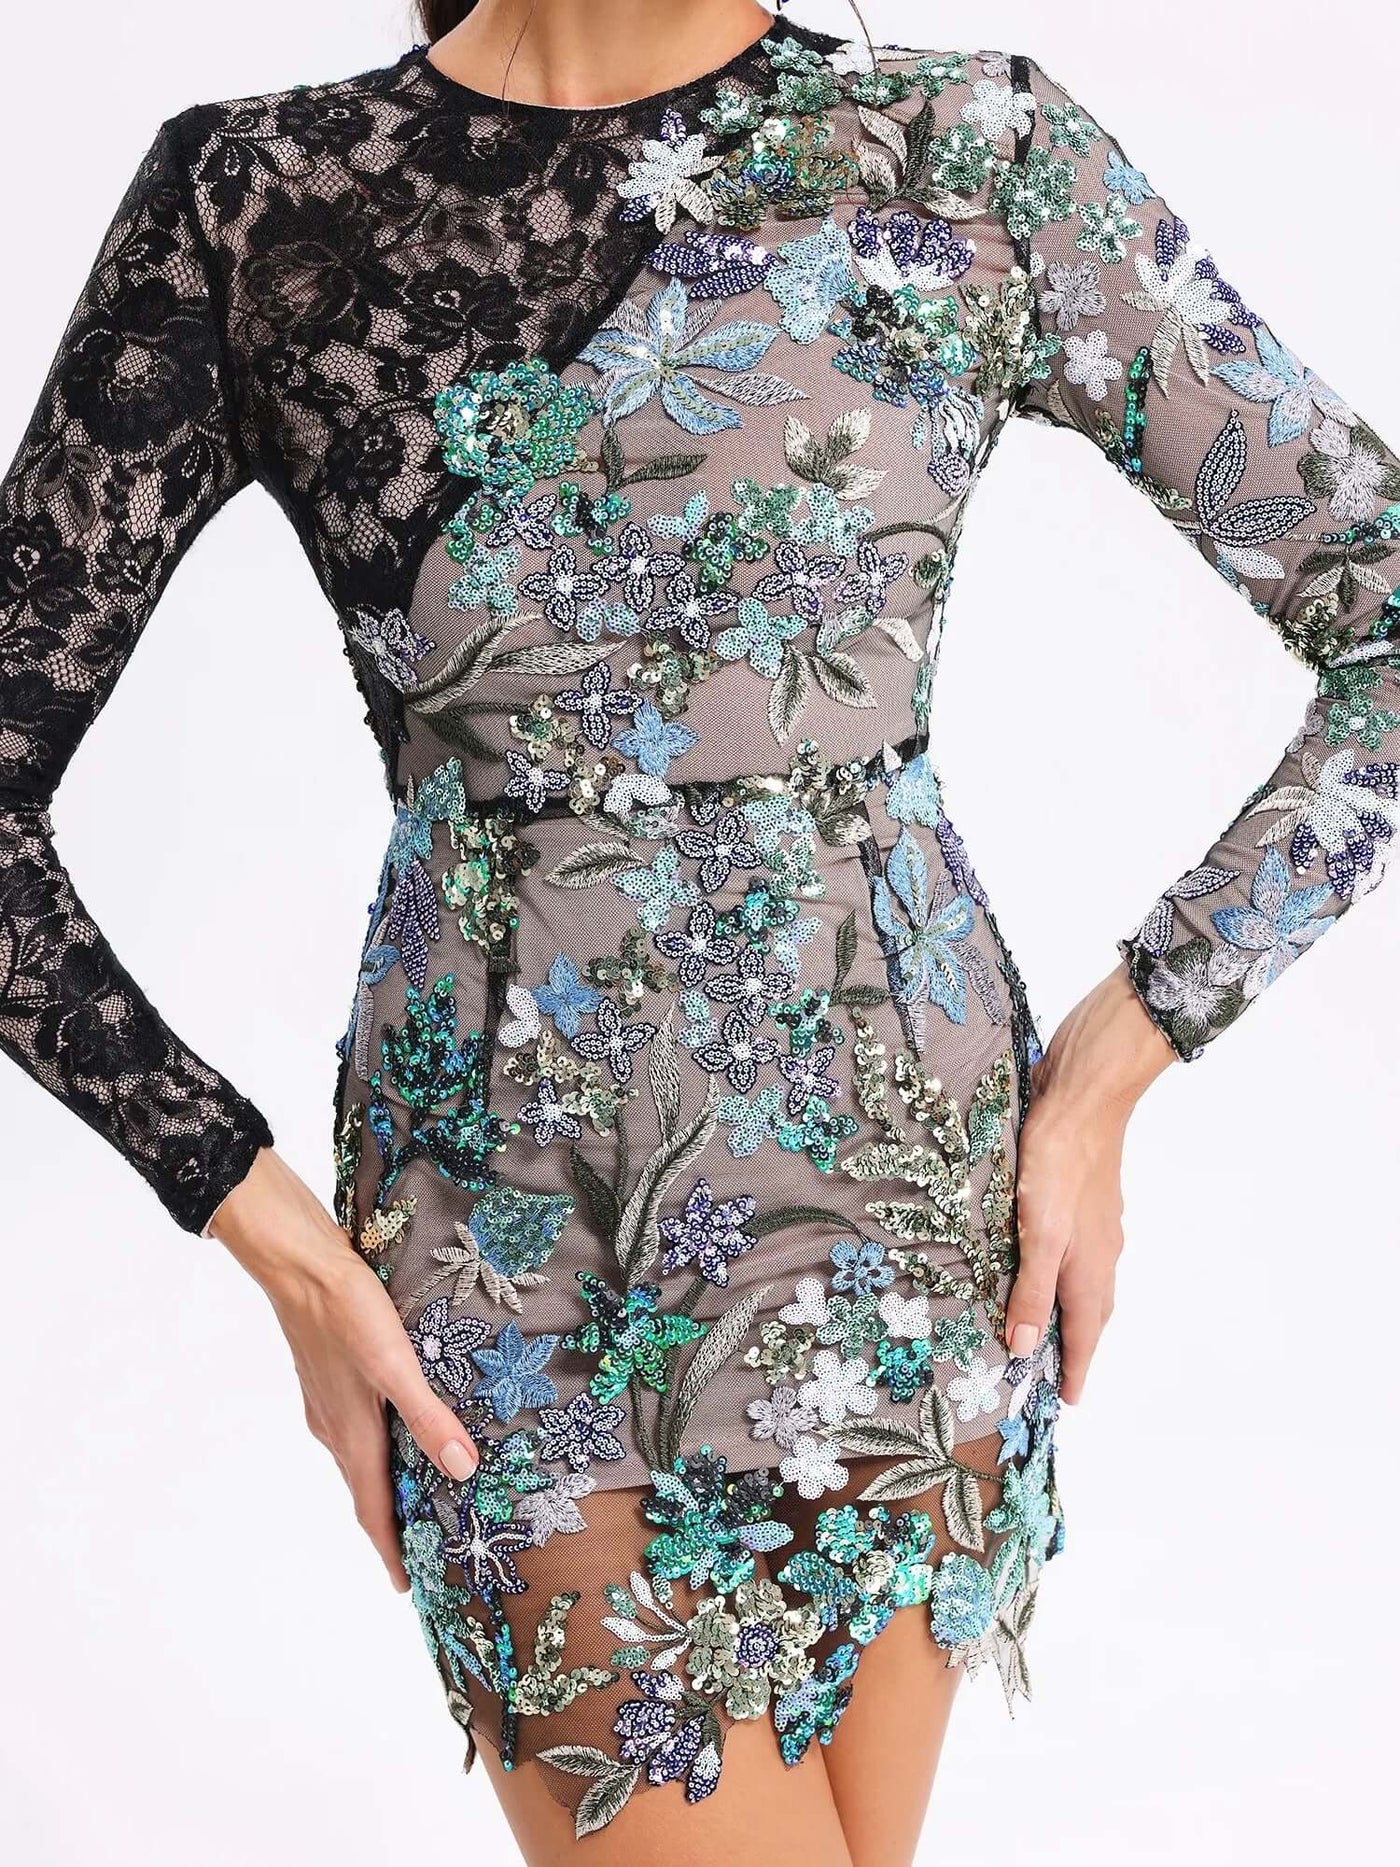 Image of a sophisticated Long Sleeve Lace Sequin Floral Dress